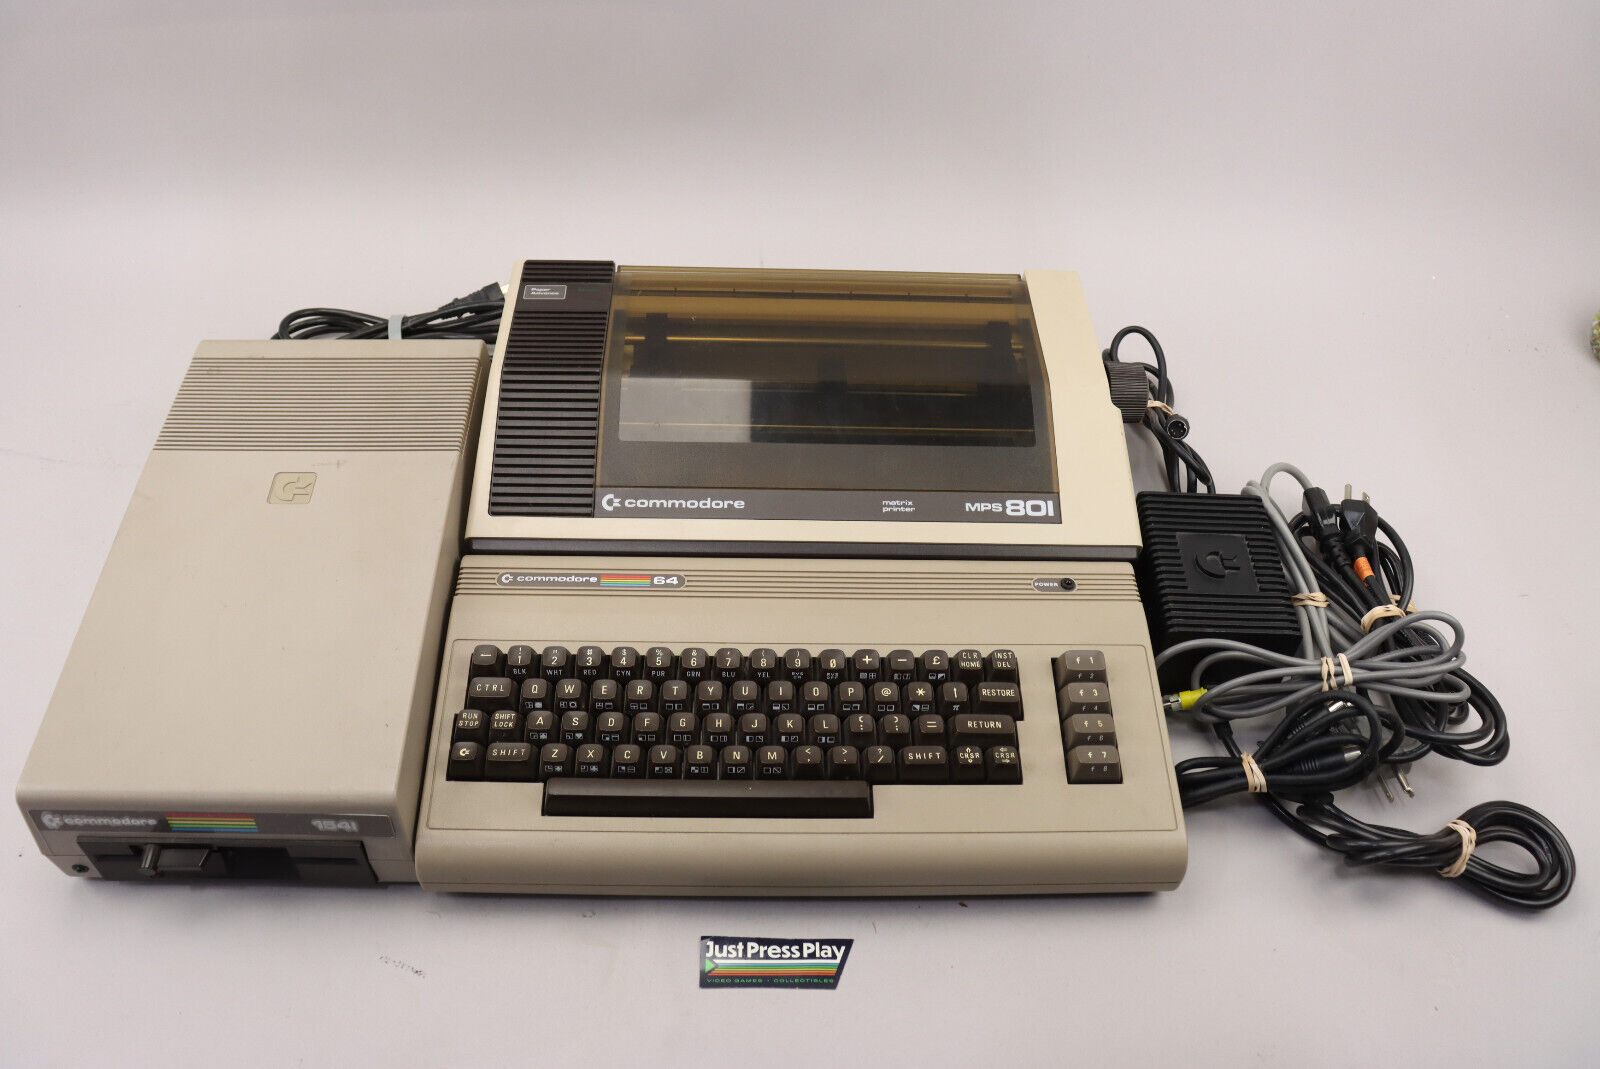 Commodore 64 Computer w/1541 Disk Drive, MPS 801 Printer & Cables Tested Working